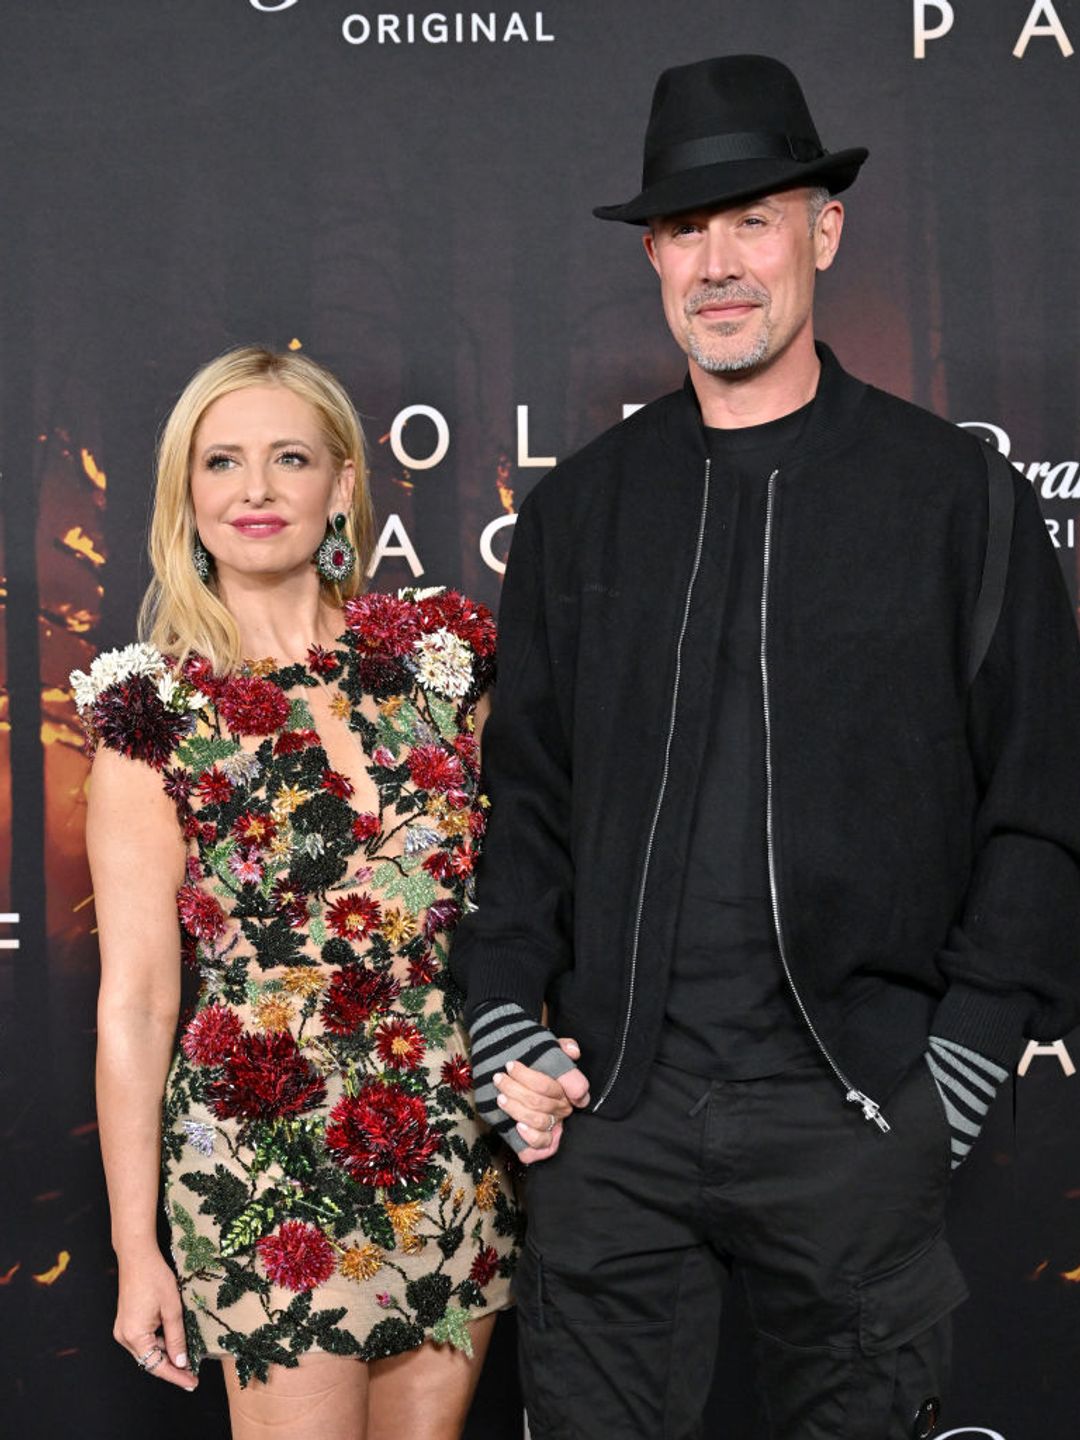 Sarah Michelle Gellar and Freddie Prinze Jr. attend the Los Angeles Premiere of Paramount+'s  "Wolf Pack" at Harmony Gold on January 19, 2023 in Los Angeles